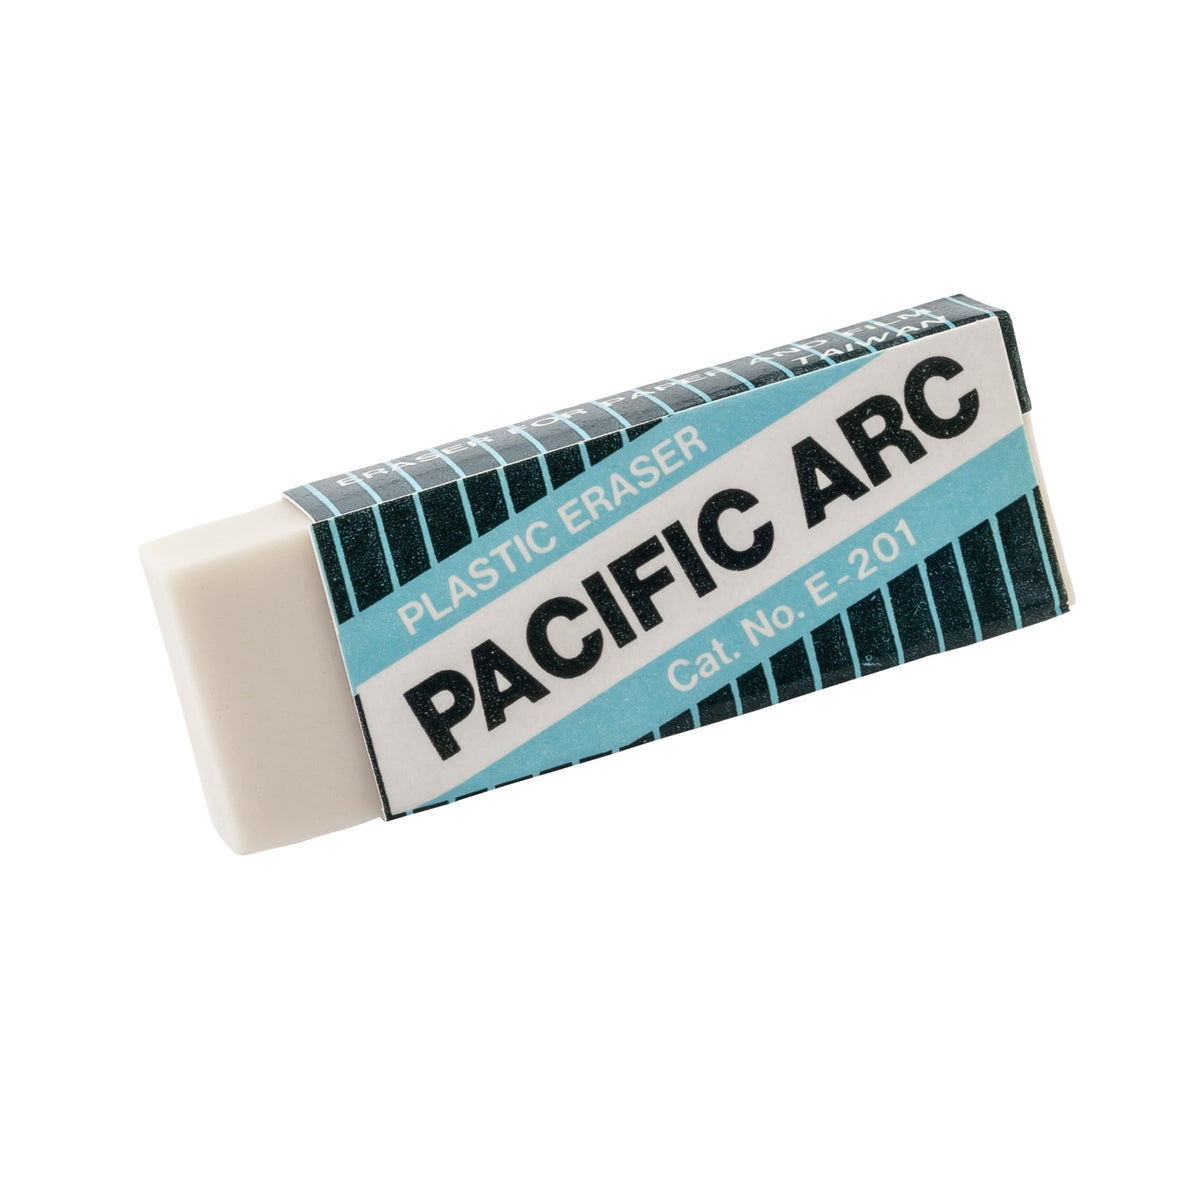  Pacific Arc Professional Erasing Shield Solid Stainless Steel  with 26 Openings, 3 Pack : Arts, Crafts & Sewing